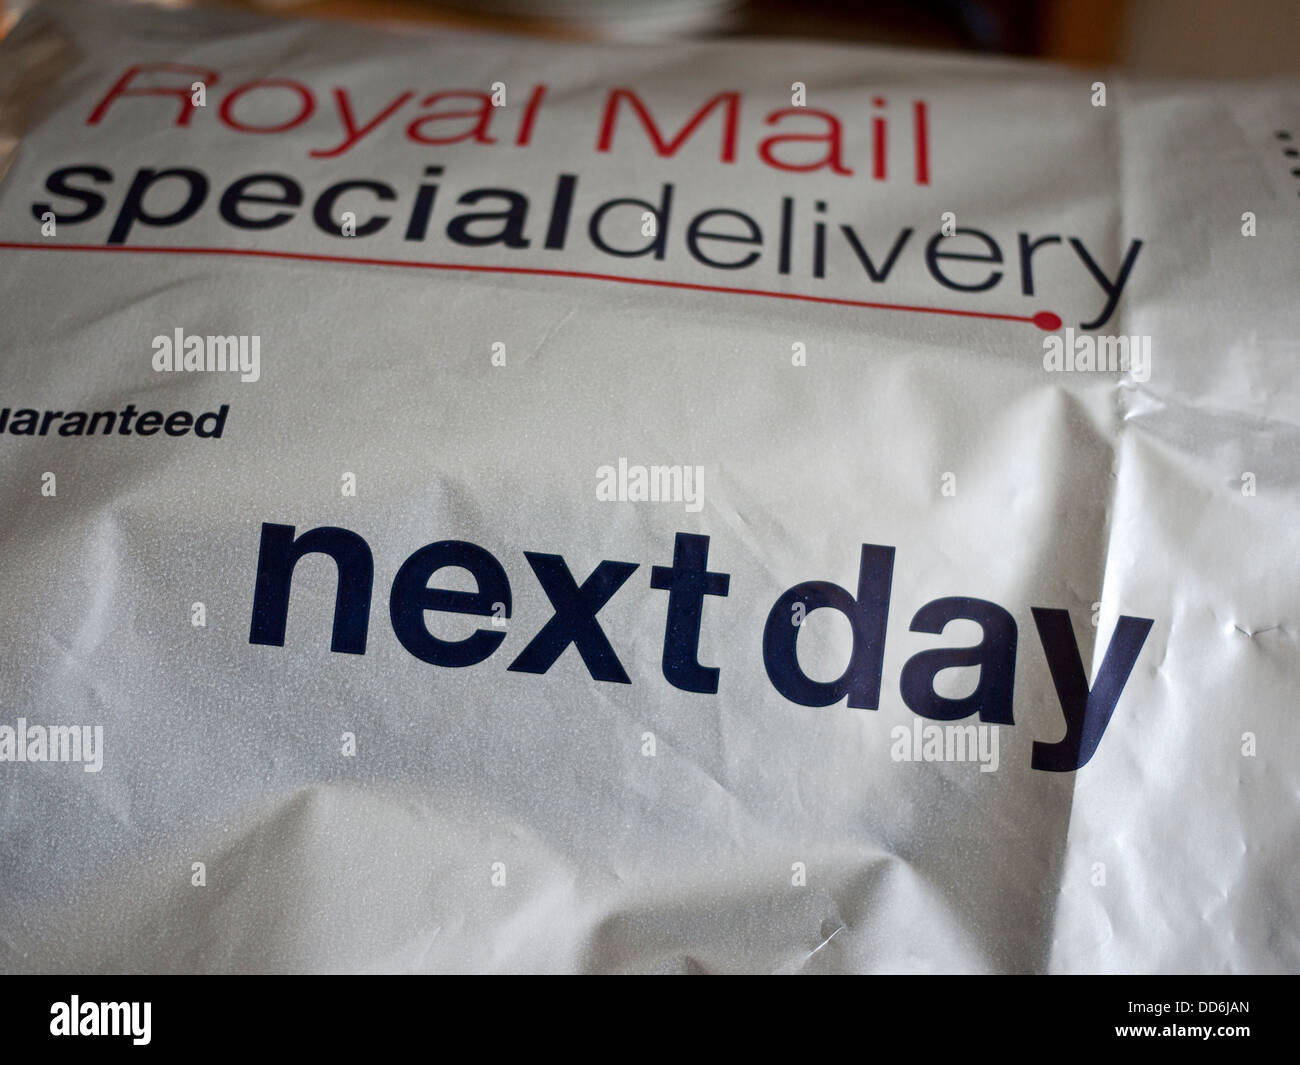 Royal Mail Special Delivery Guaranteed Next Day Delivery Stock Photo, Royalty Free Image ...